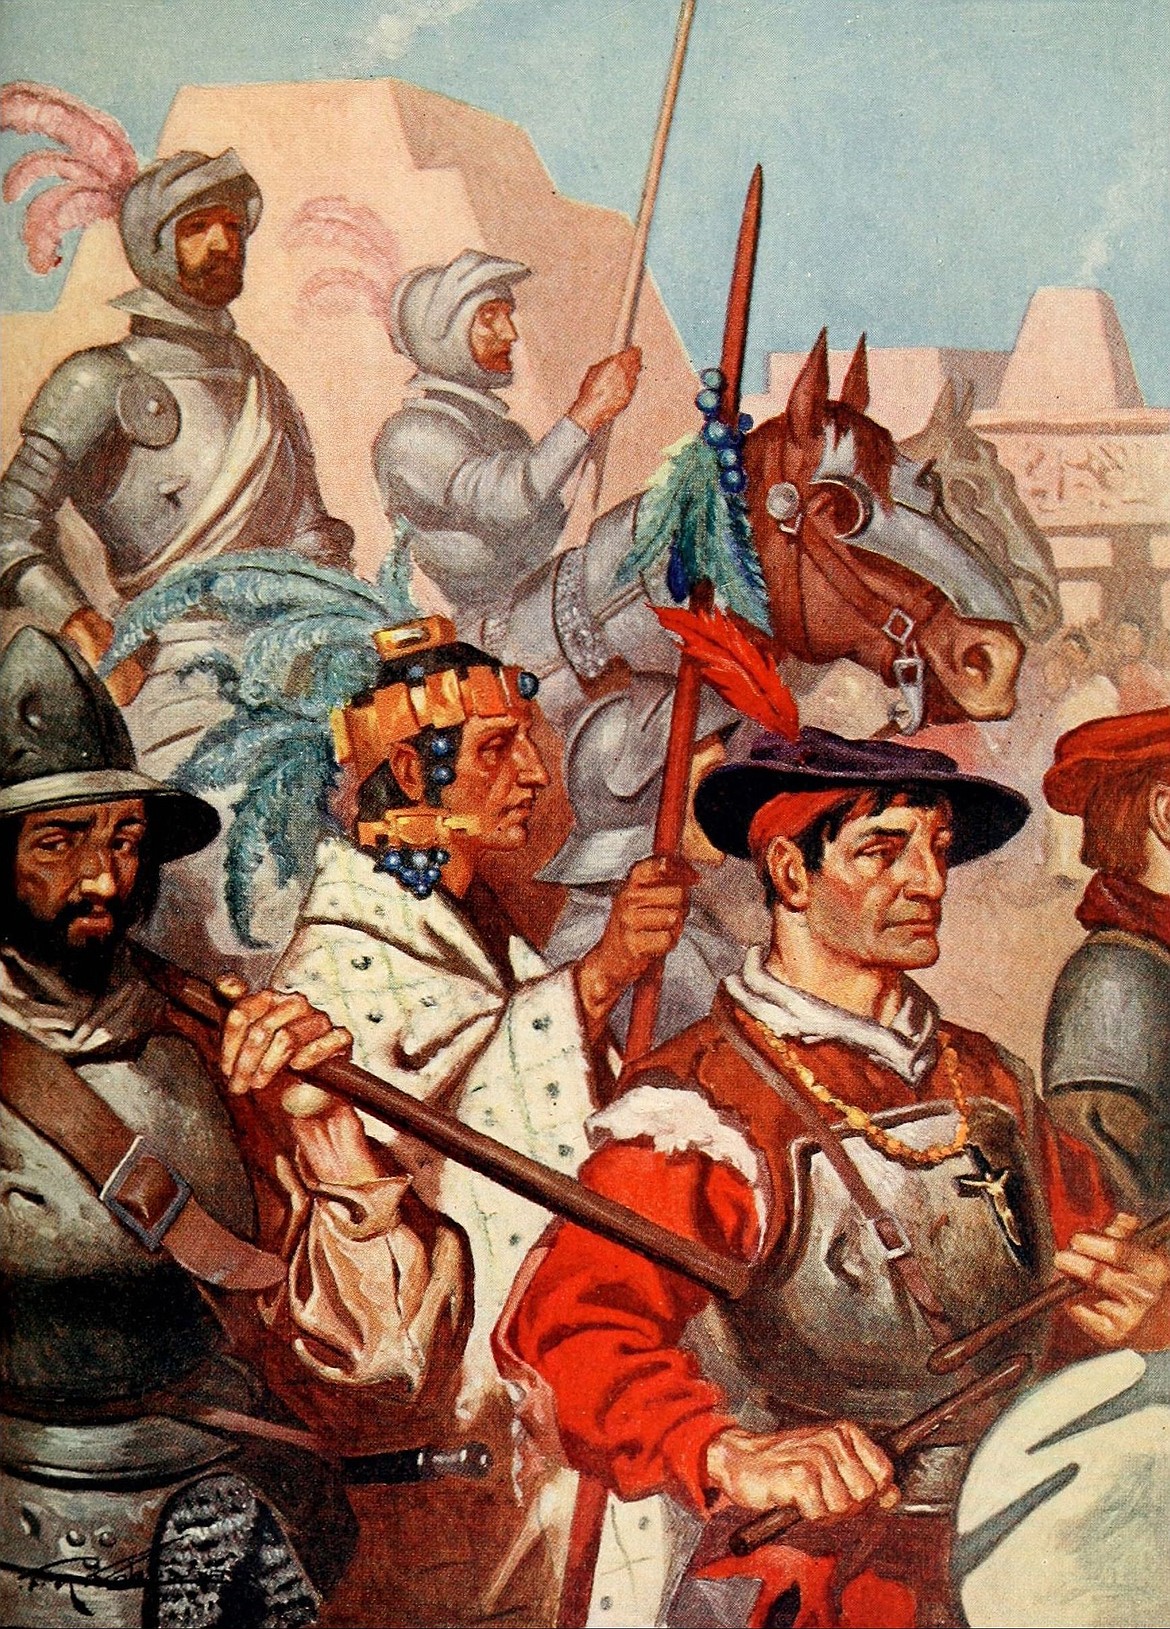 A 1909 book illustration by J.H. Robinson depicting Spanish conquistadors led by Hernán Cortés entering Tenochtitlán (now Mexico City) in 1519 to martial music.